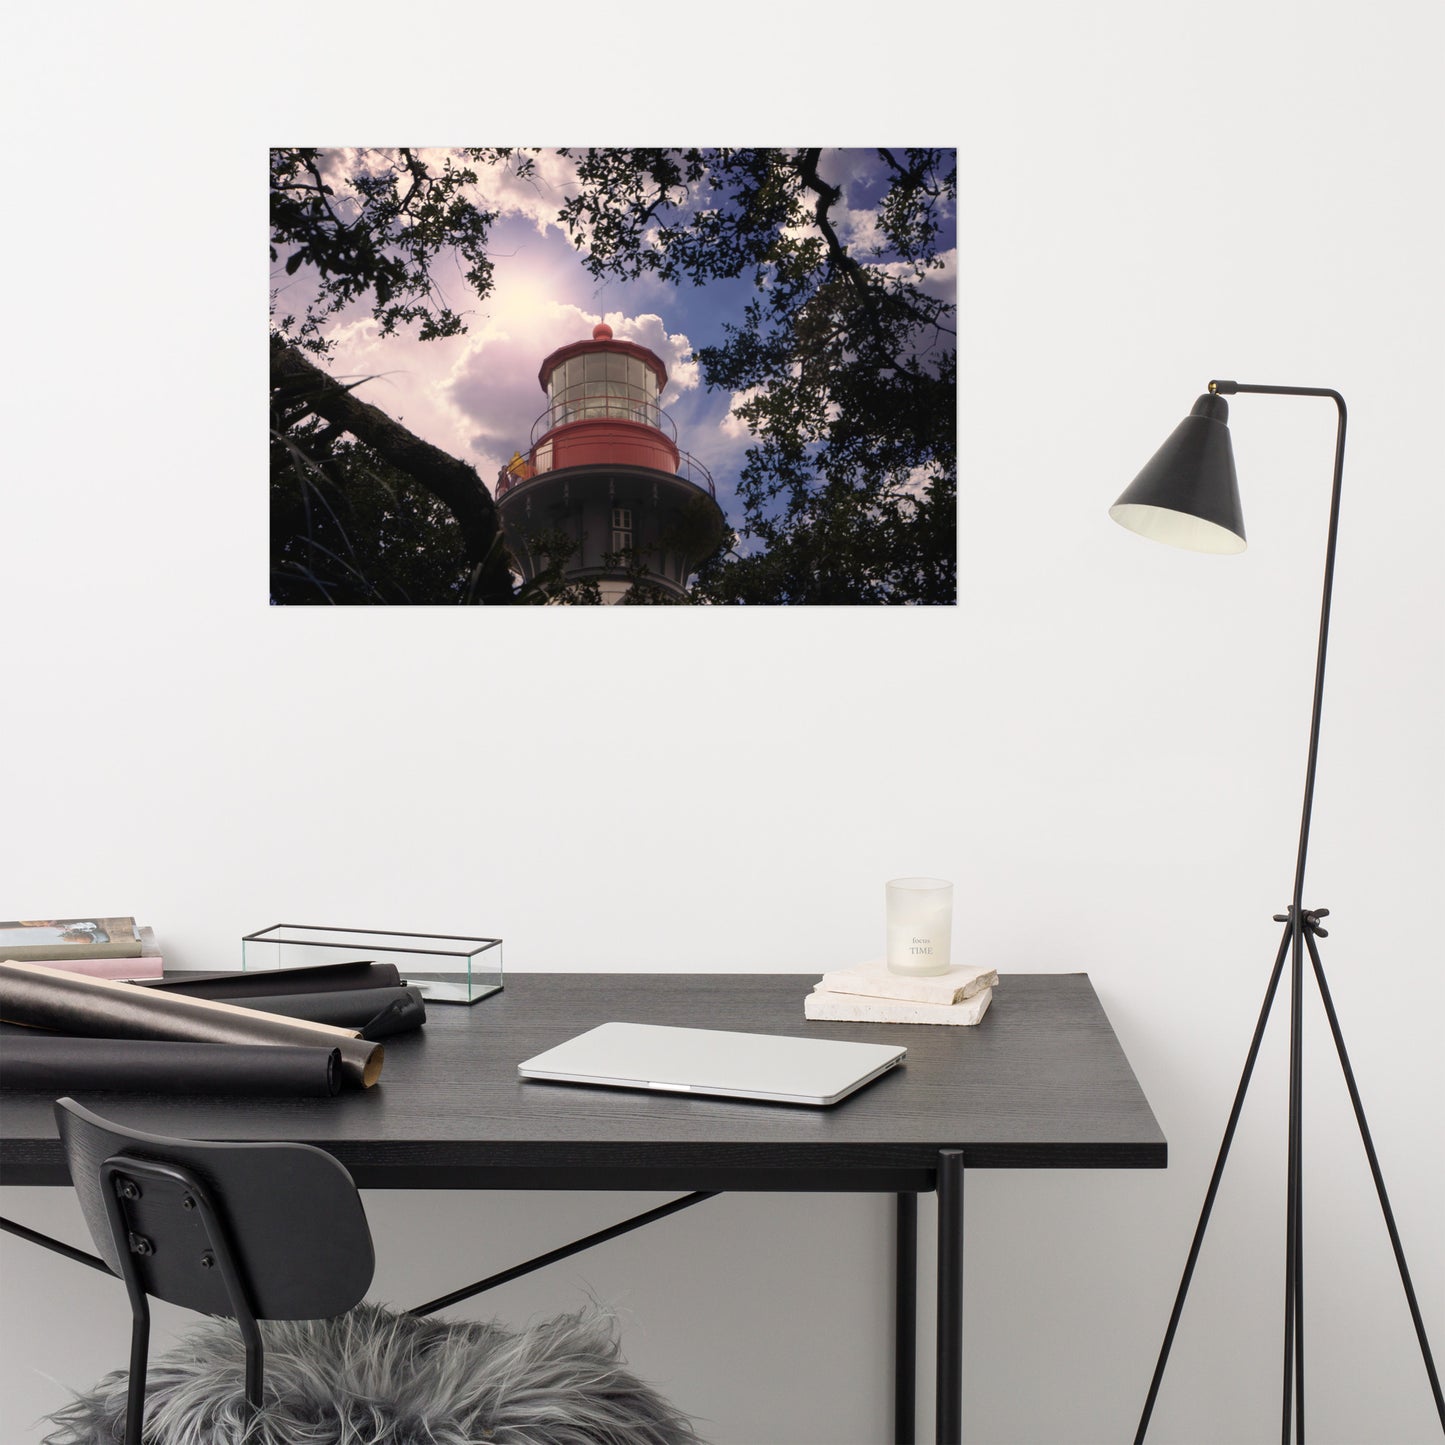 St Augustine Lighthouse and Tree Branches Urban Building Photograph Loose Wall Art Prints